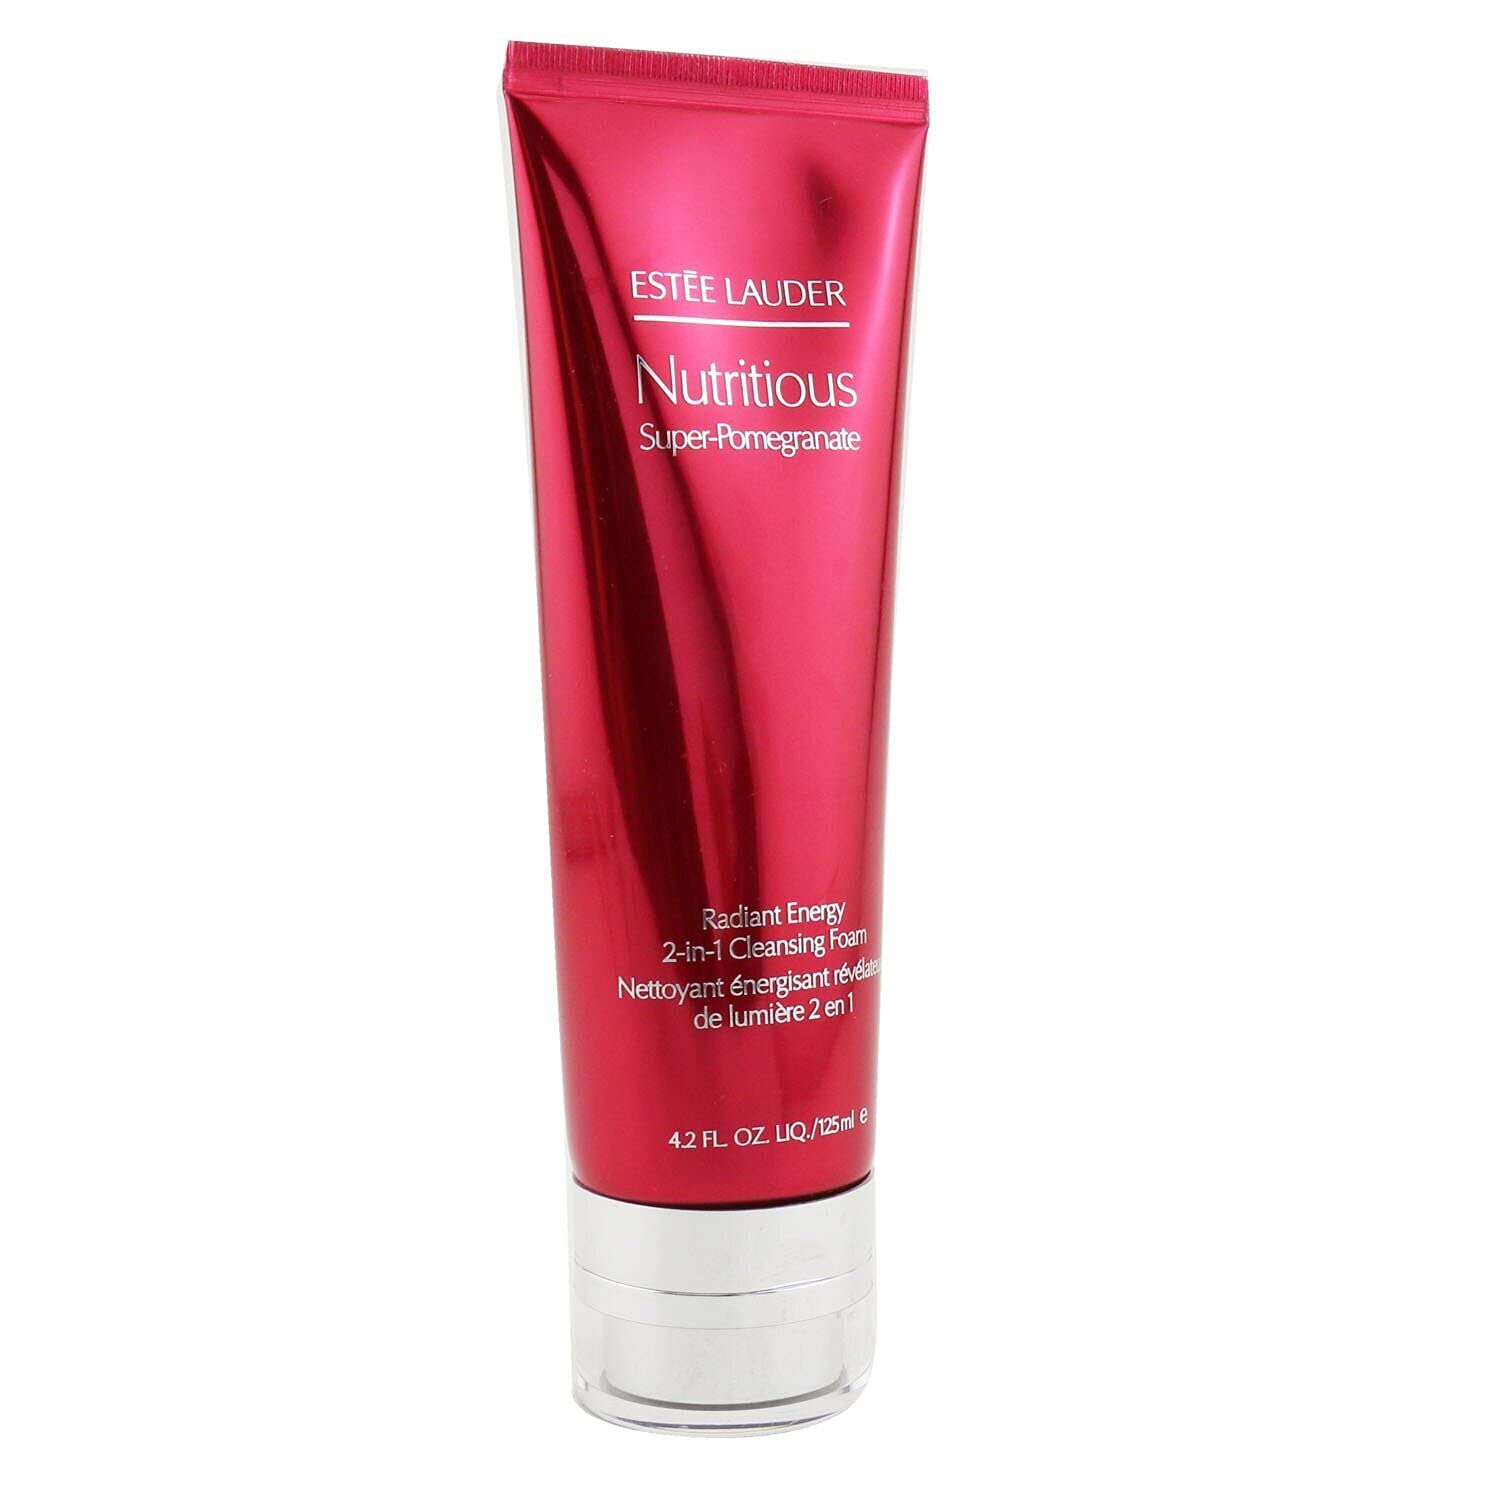 Nutritious Super-pomegranate Radiant Energy 2-in-1 Cleansing Foam 30 Ml